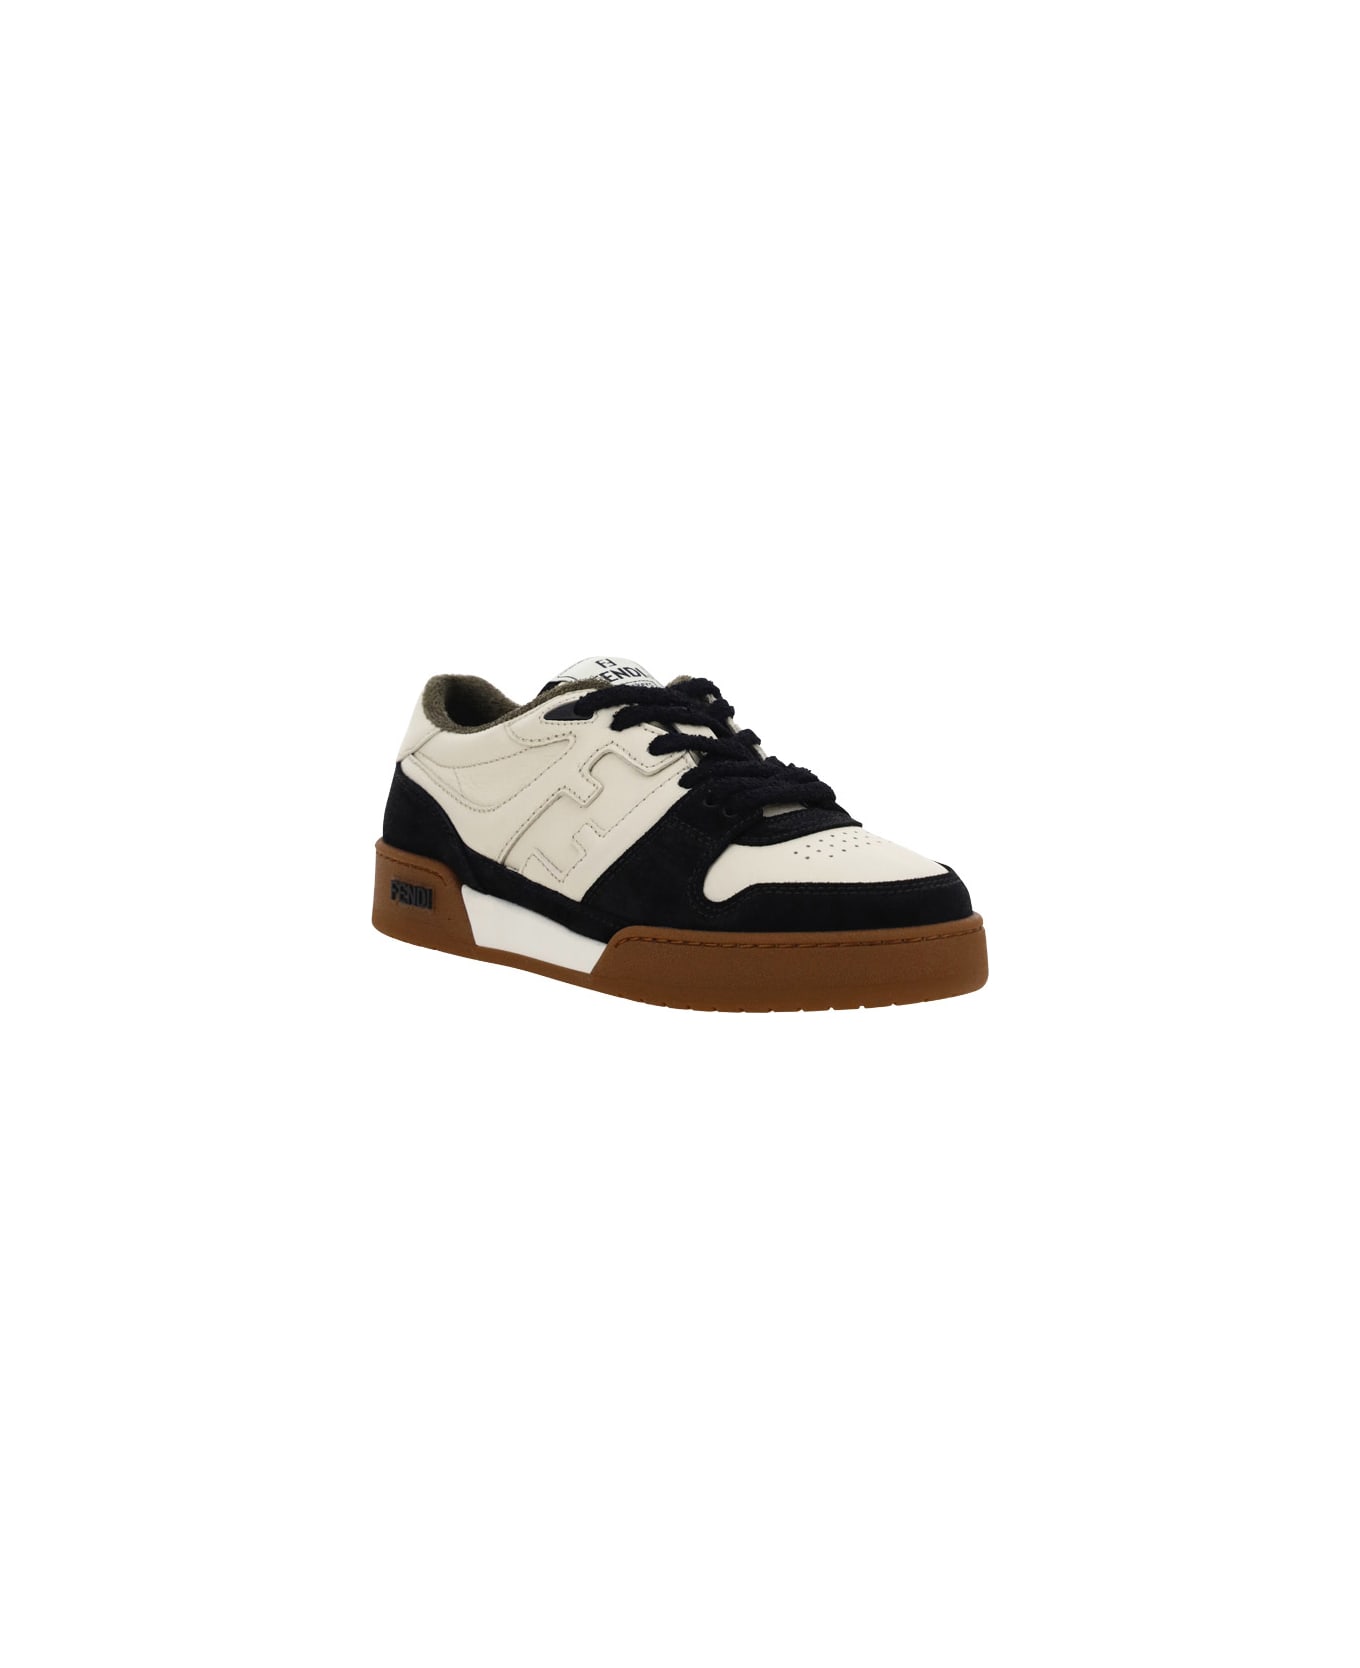 Fendi Match Sneakers In Leather With Suede Inserts - Nero+milk+nero